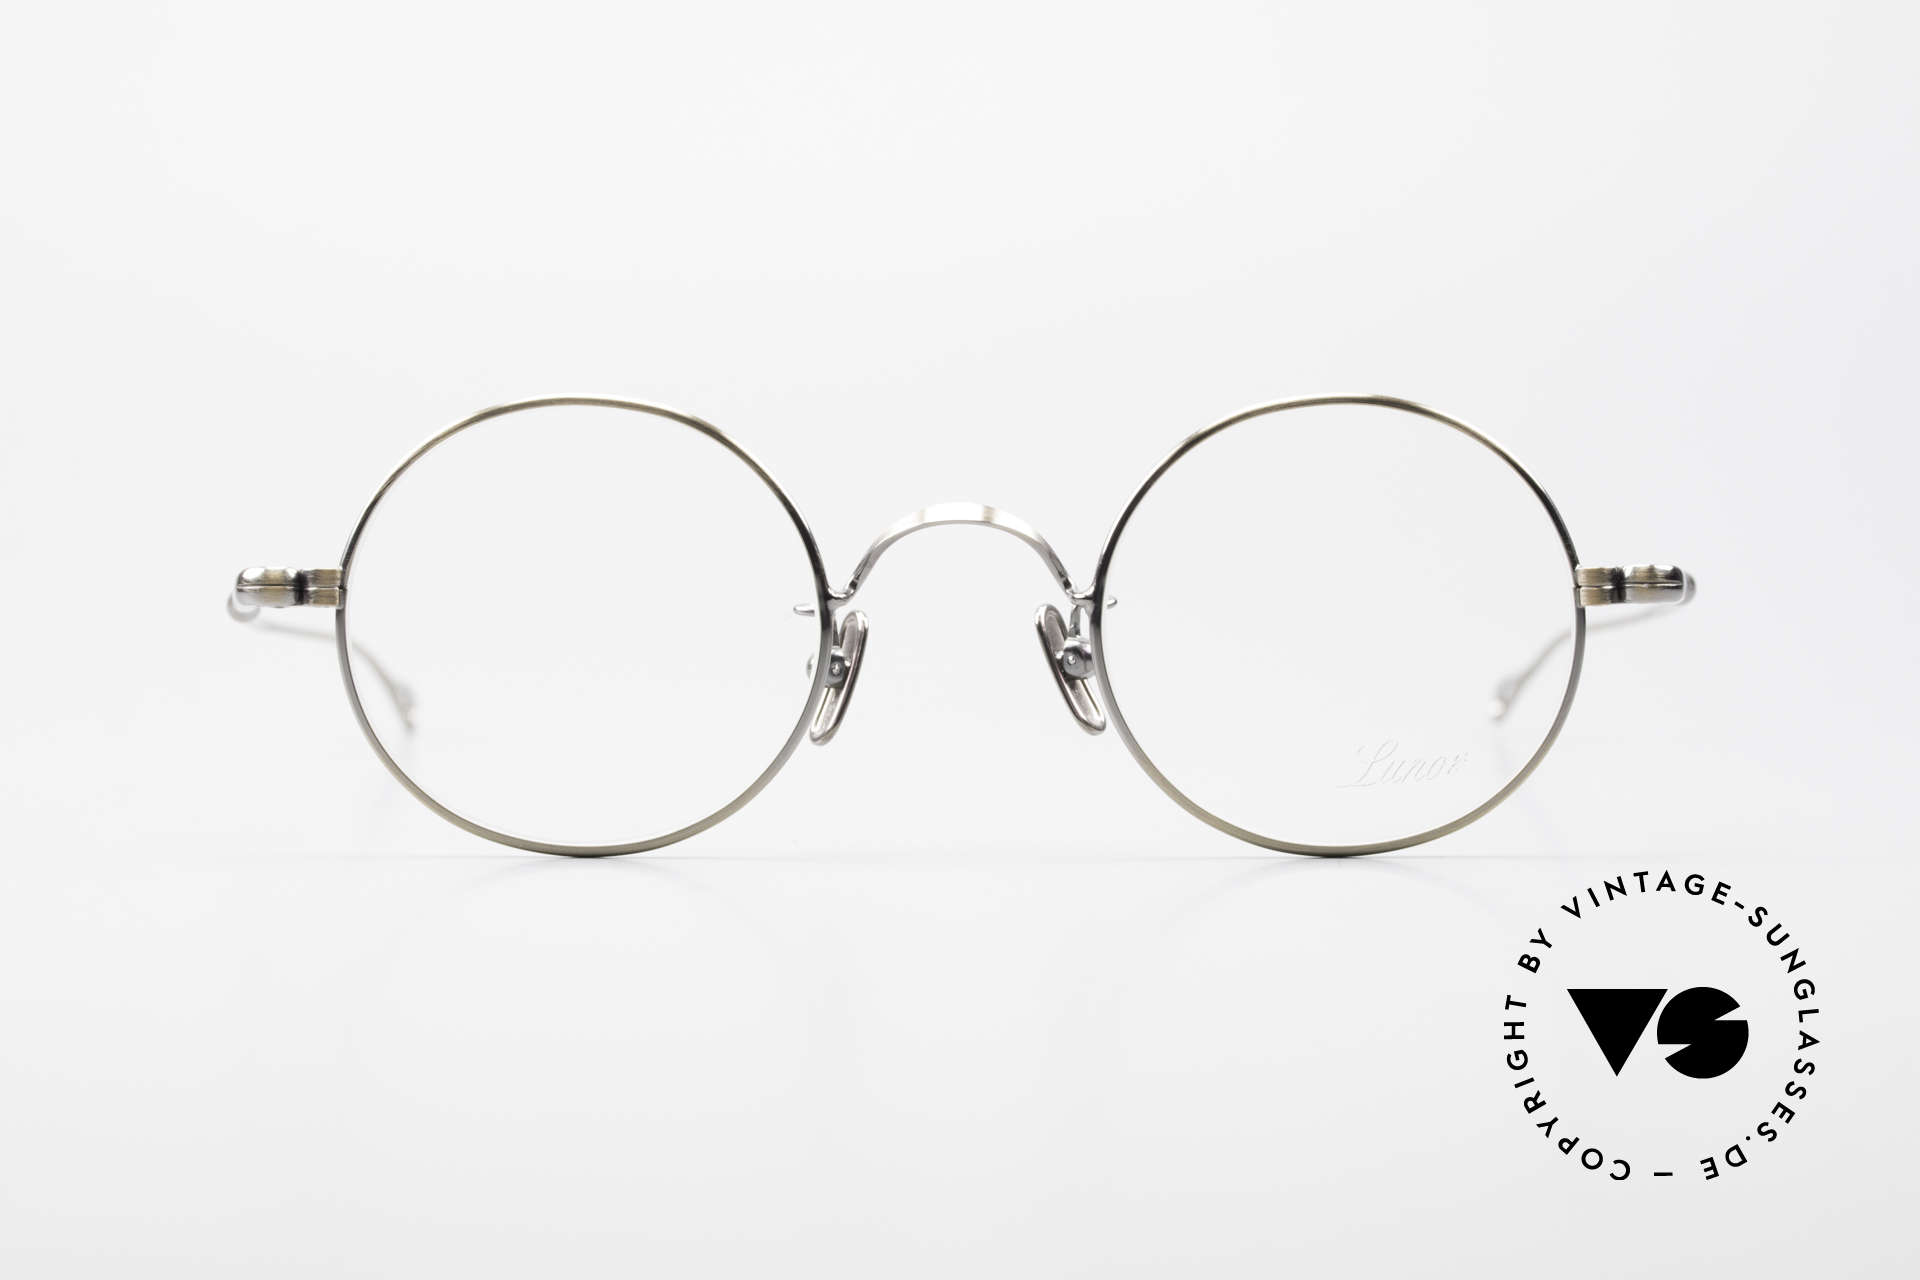 Lunor V 110 Round Lunor Glasses Vintage, LUNOR: honest craftsmanship with attention to details, Made for Men and Women